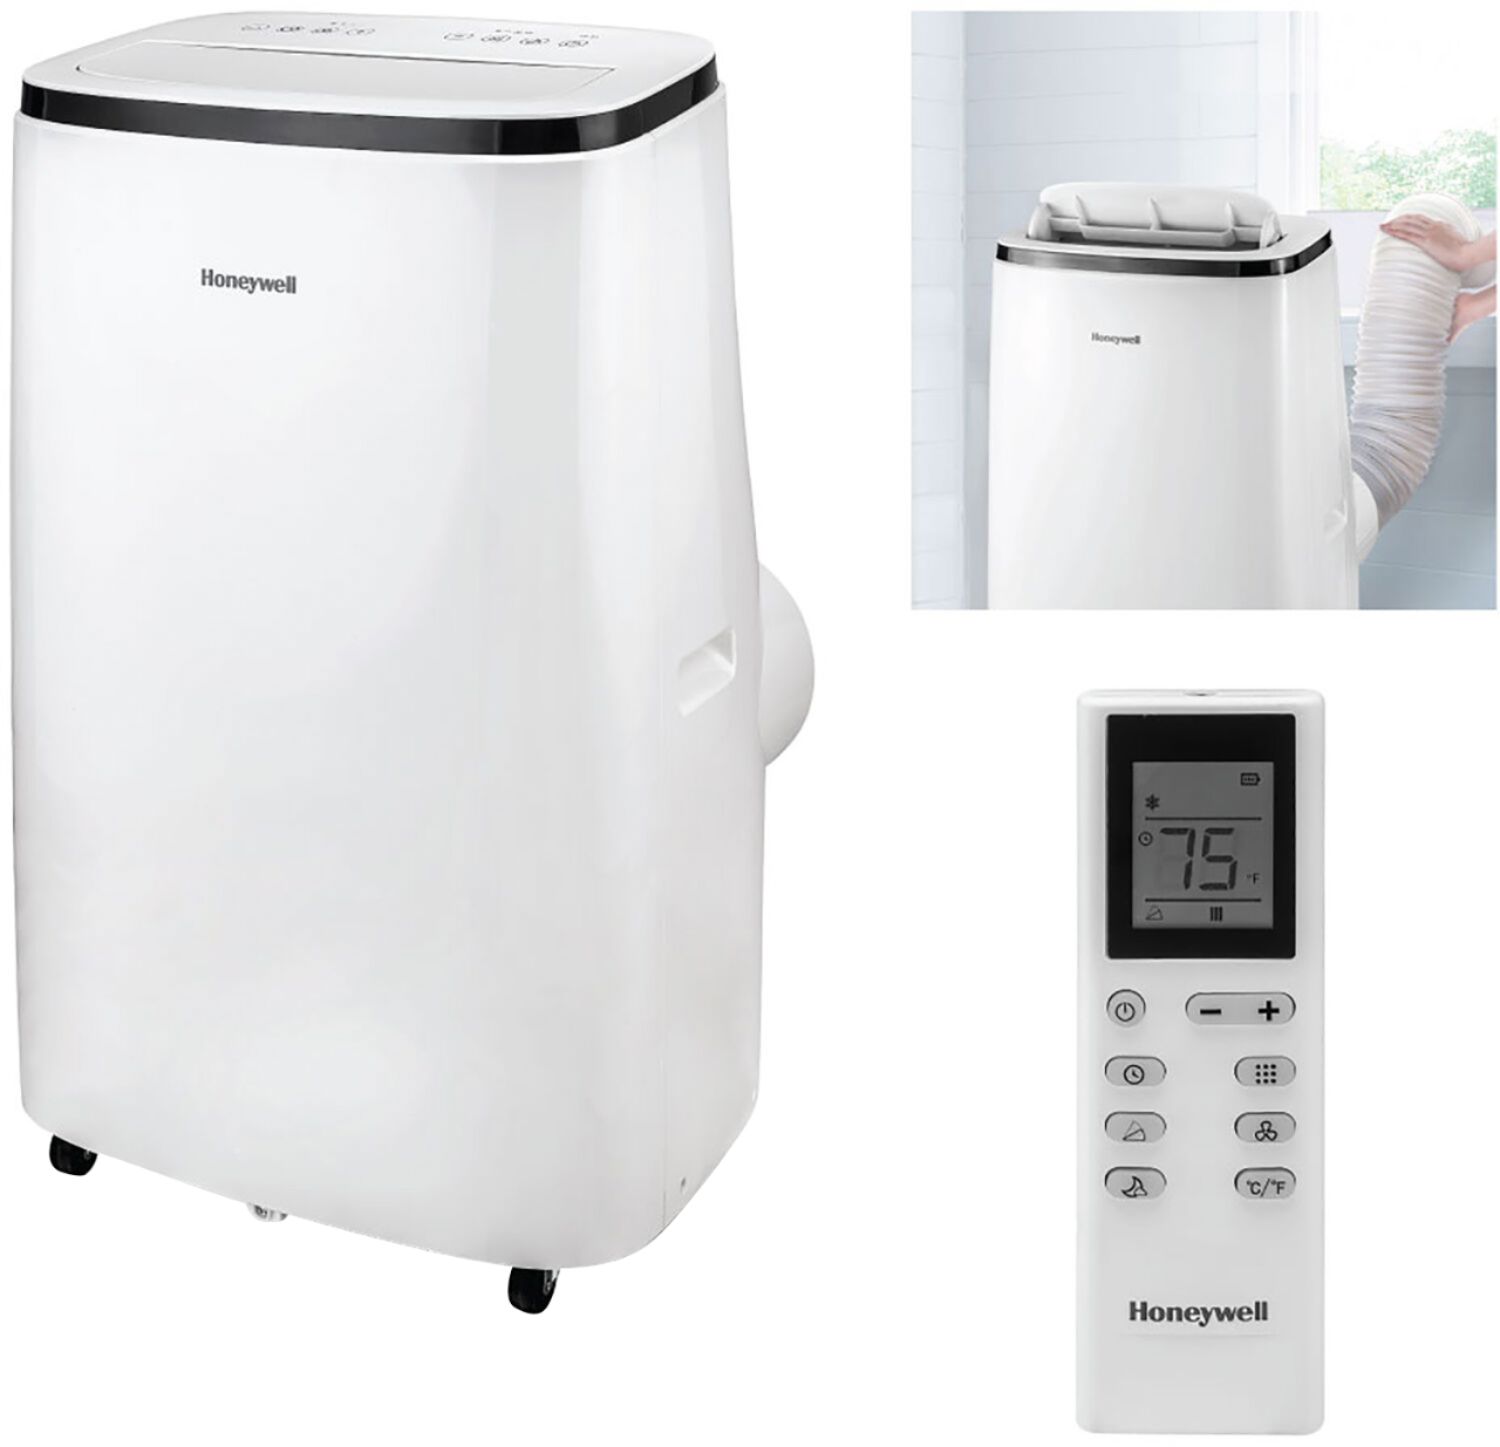 Angle View: Honeywell - 550 Sq. Ft. 12,000 BTU Portable Air Conditioner with Dehumidifier & Fan - White